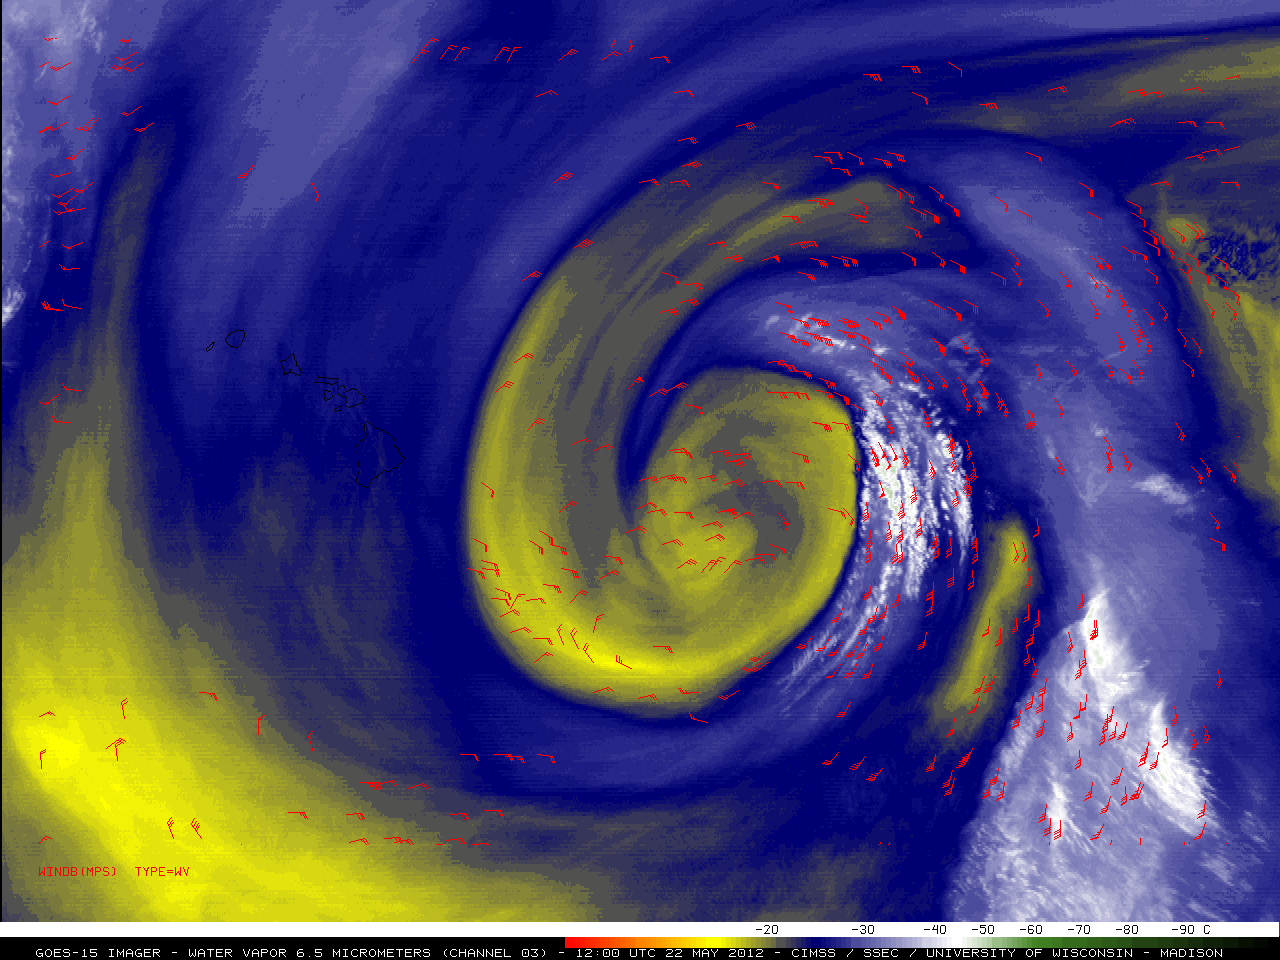 GOES-15 6.5 Âµm water vapor images + Water vapor winds (click image to play animation)